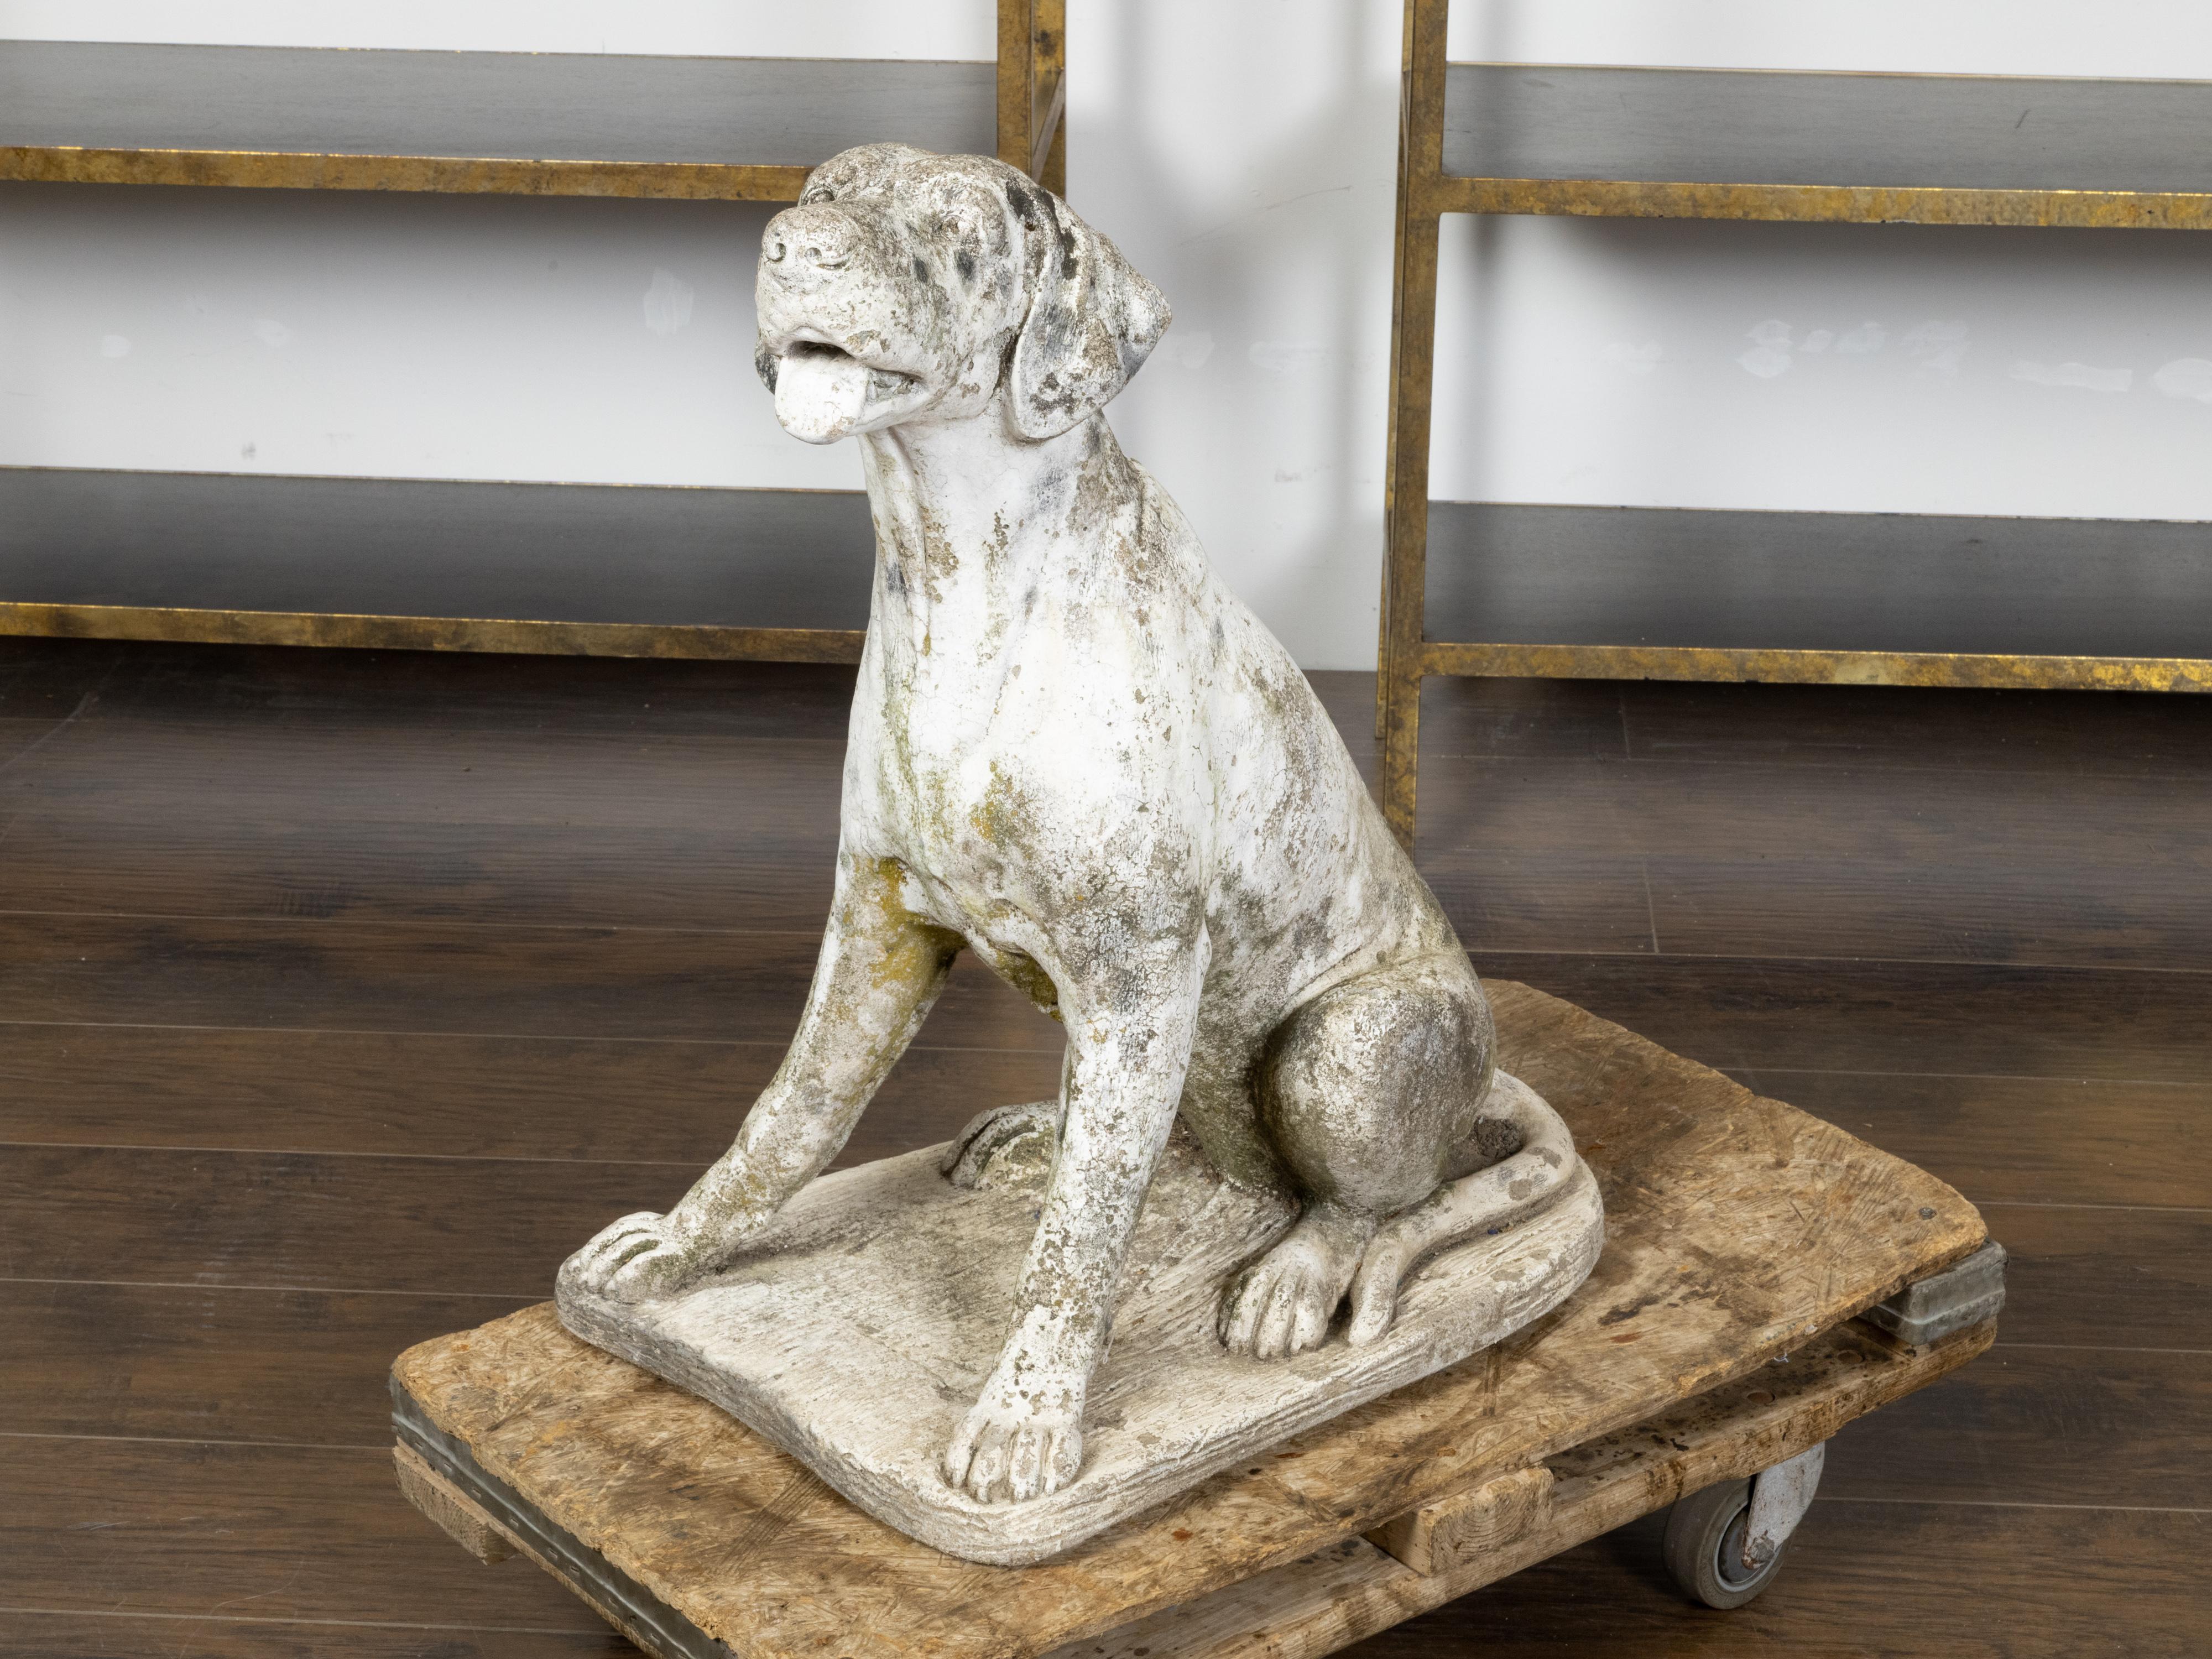 20th Century English 1920s Carved Stone Sculpture of a Dog Obediently Sitting on a Base